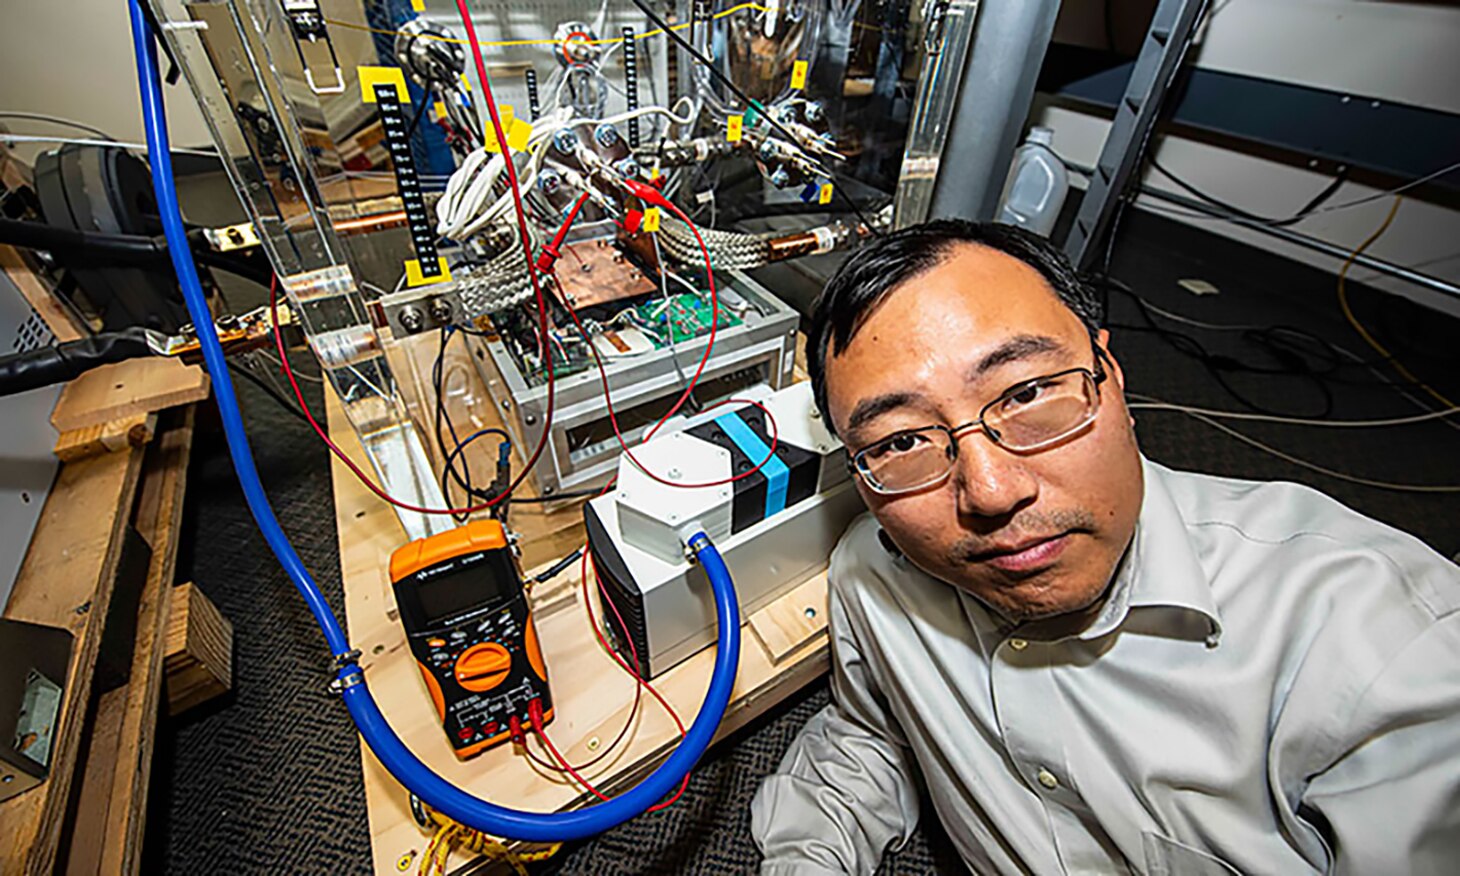 NPS Associate Professor Dr. Di Zhang led a team of NPS students to create and successfully test a circuit breaker that could support large electric platforms running on direct current electricity—a breakthrough in the future development of electric aircraft propulsion.